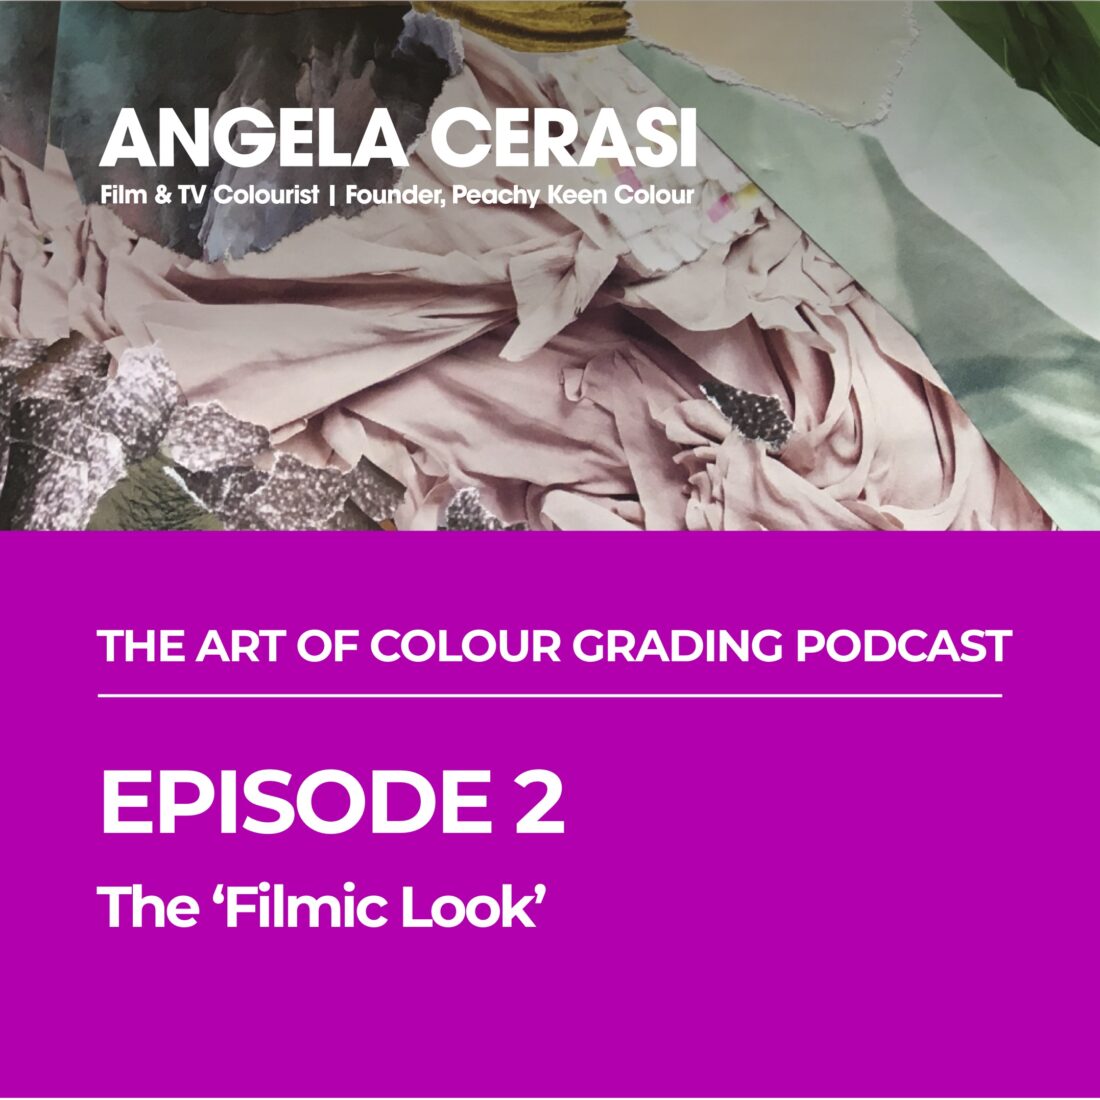 Angela Cerasi's podcast episode about colour grading and the "filmic look"